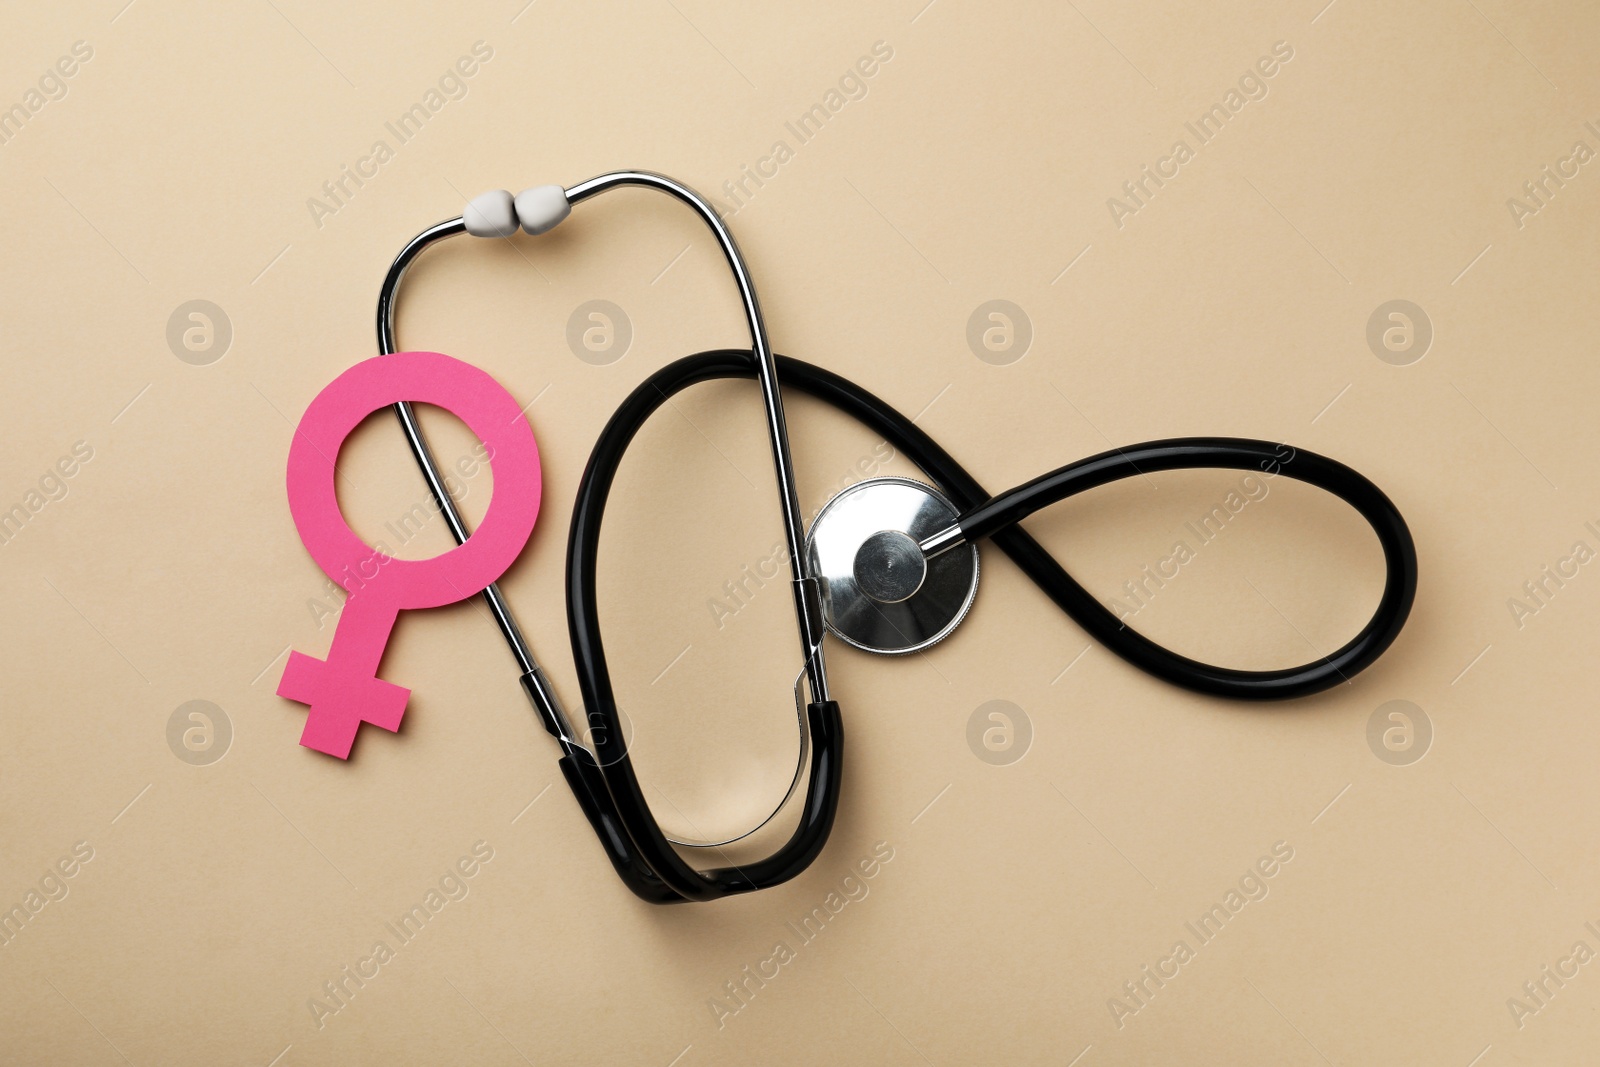 Photo of Female gender sign and stethoscope on beige background, flat lay. Women's health concept